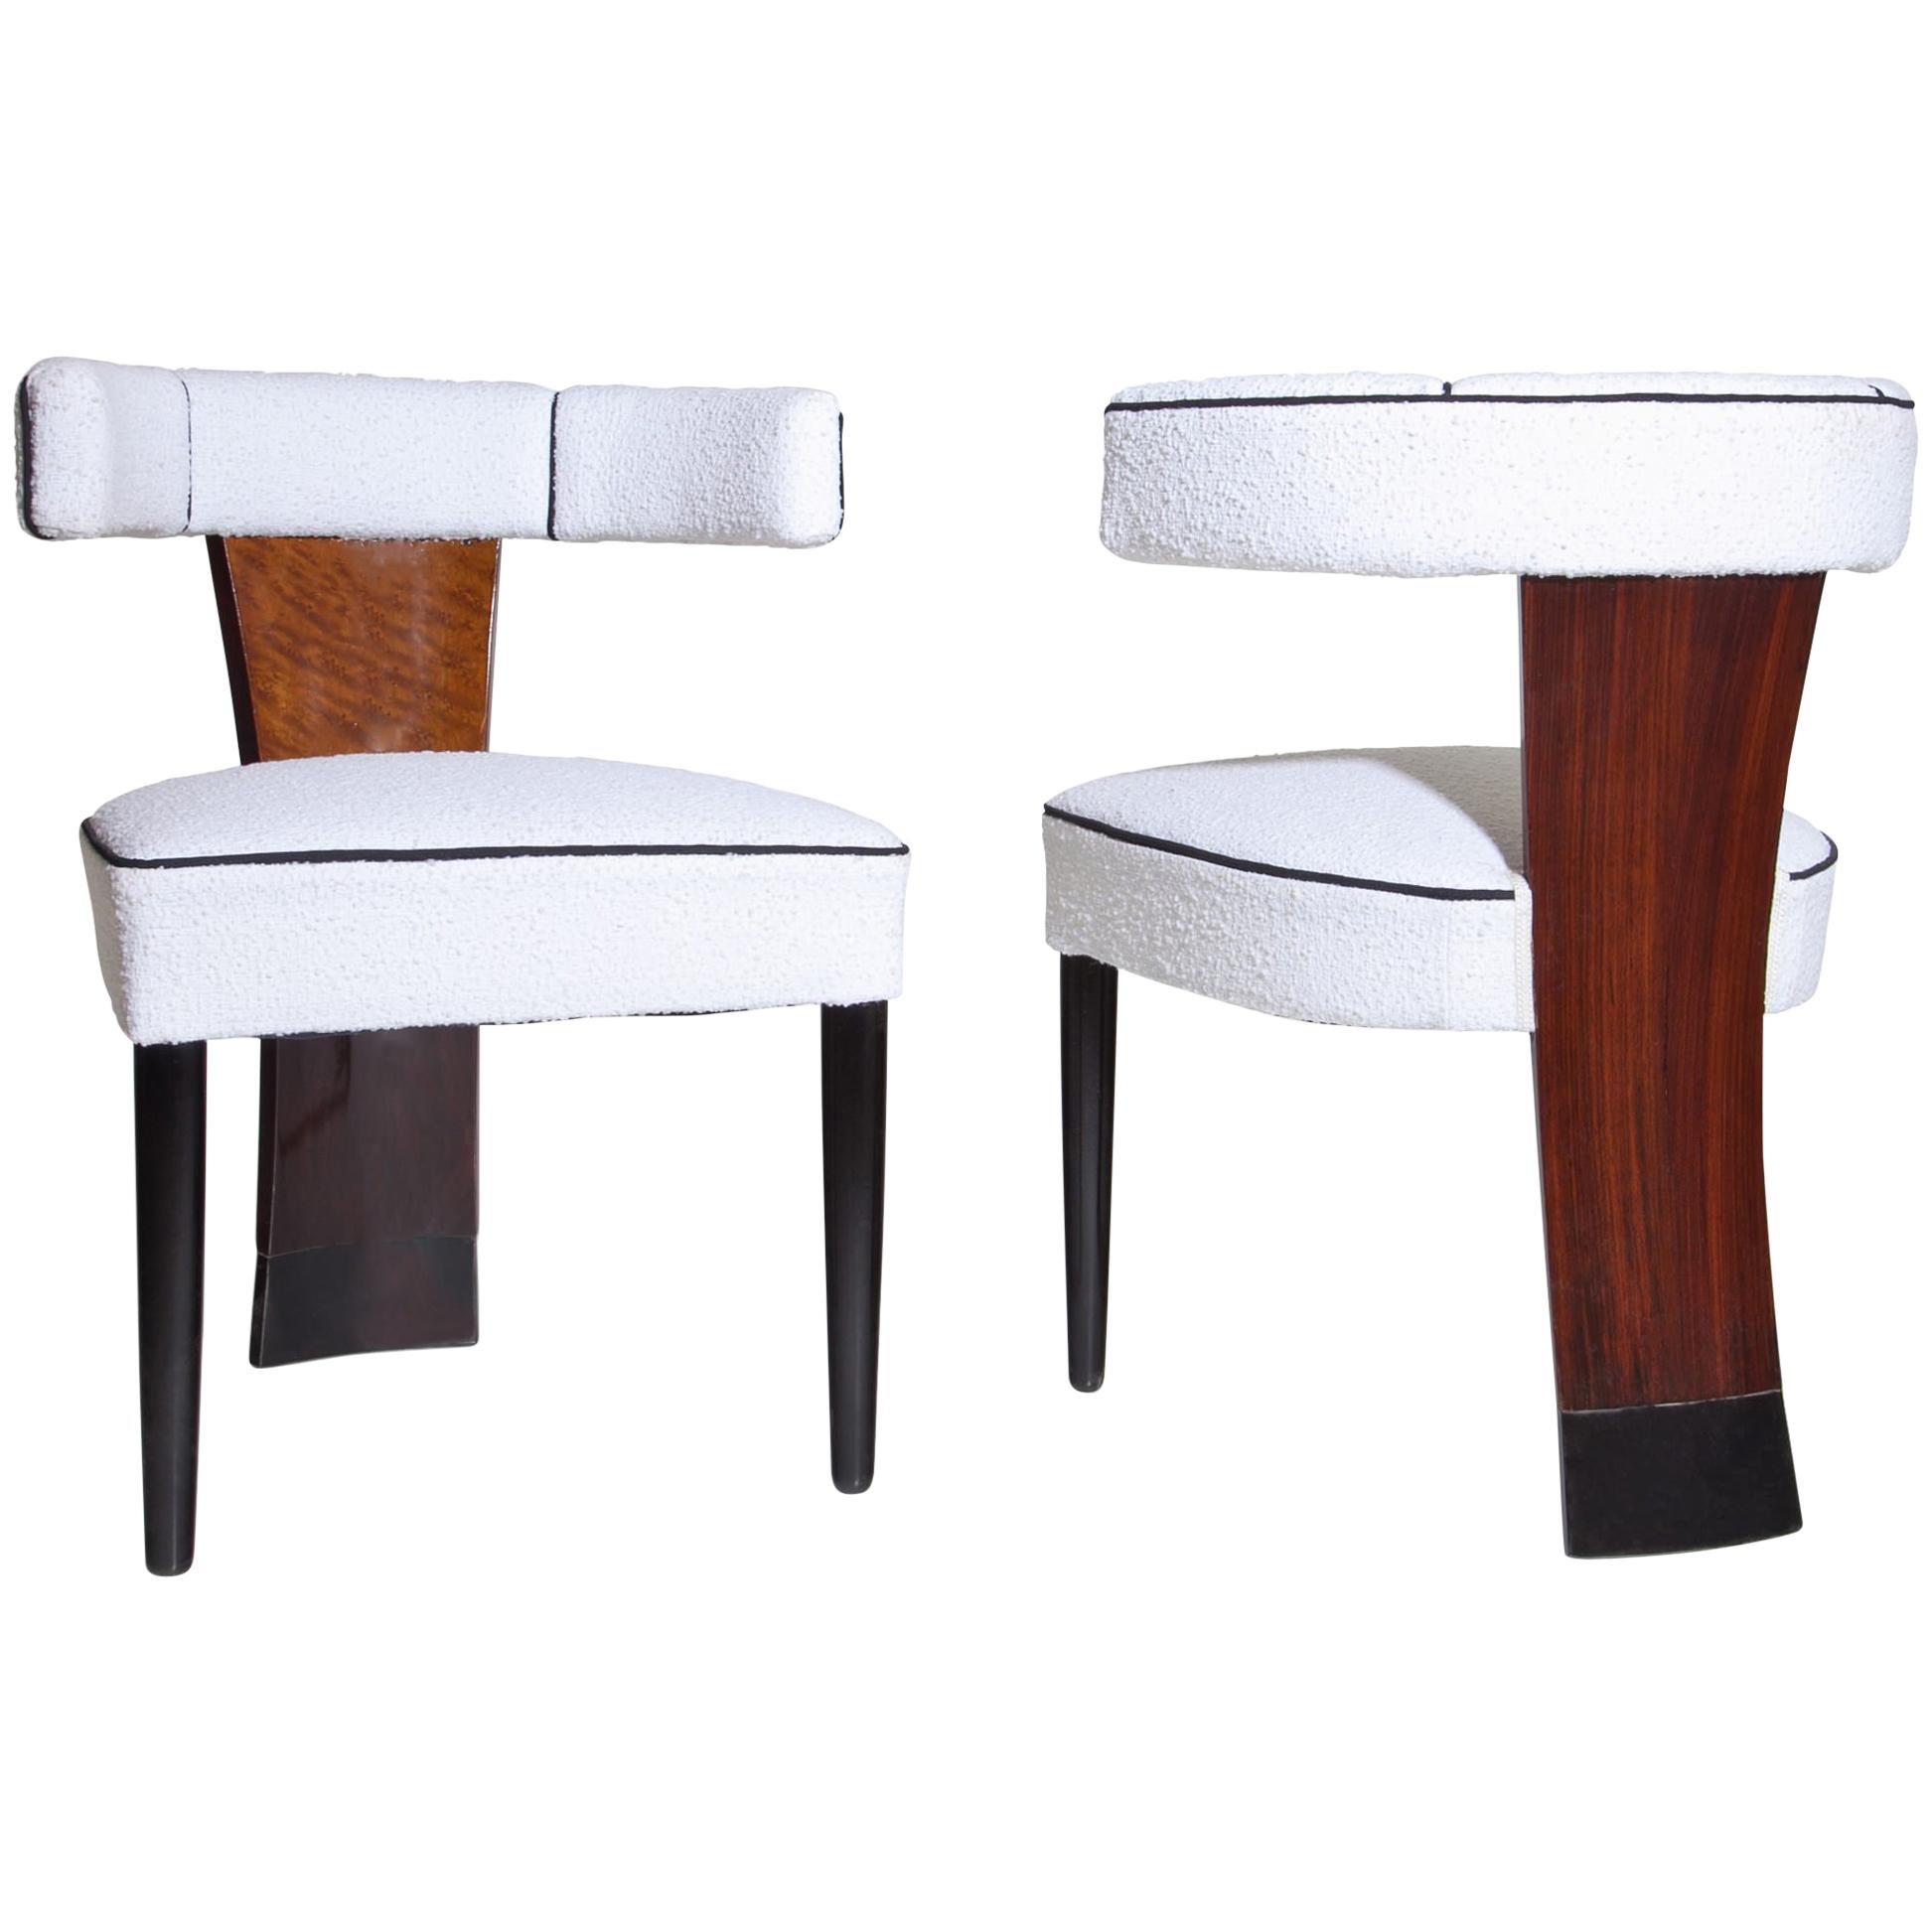 Chairs, Probably, France, Mid-20th Century